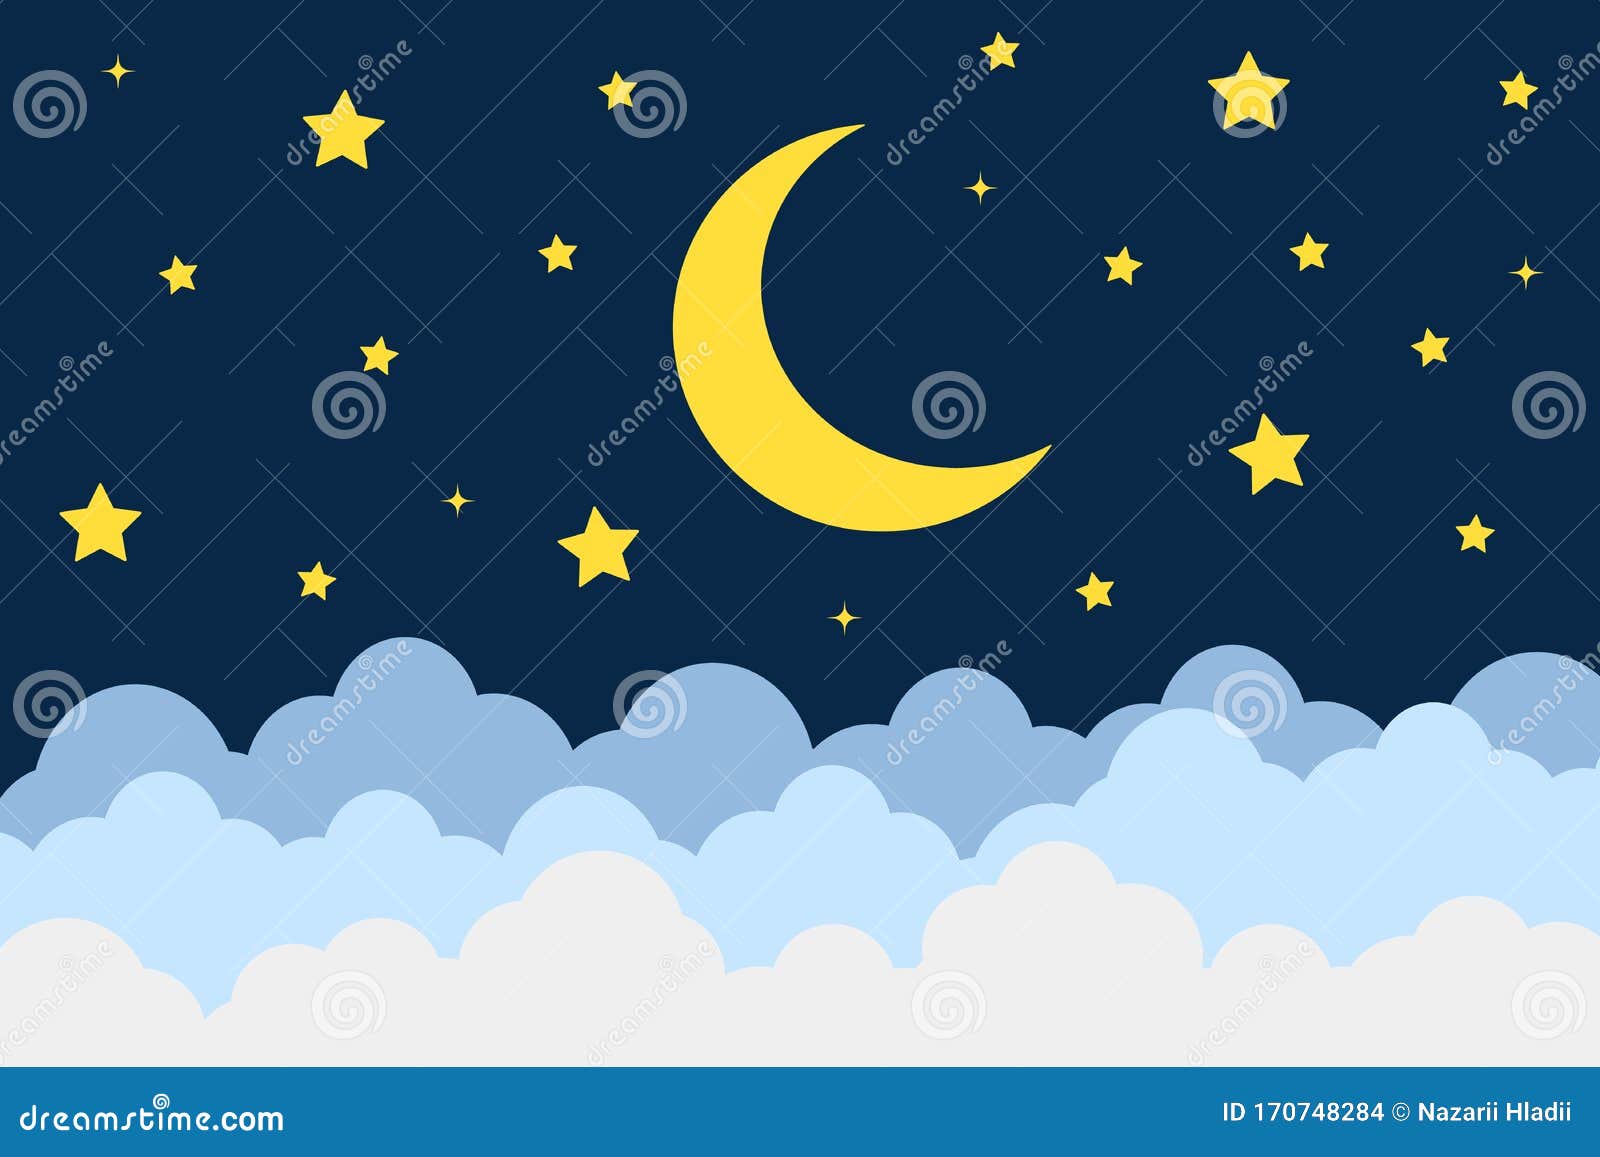 Moon and Stars Background. Vector Illustration. Flat. Stock Vector ...